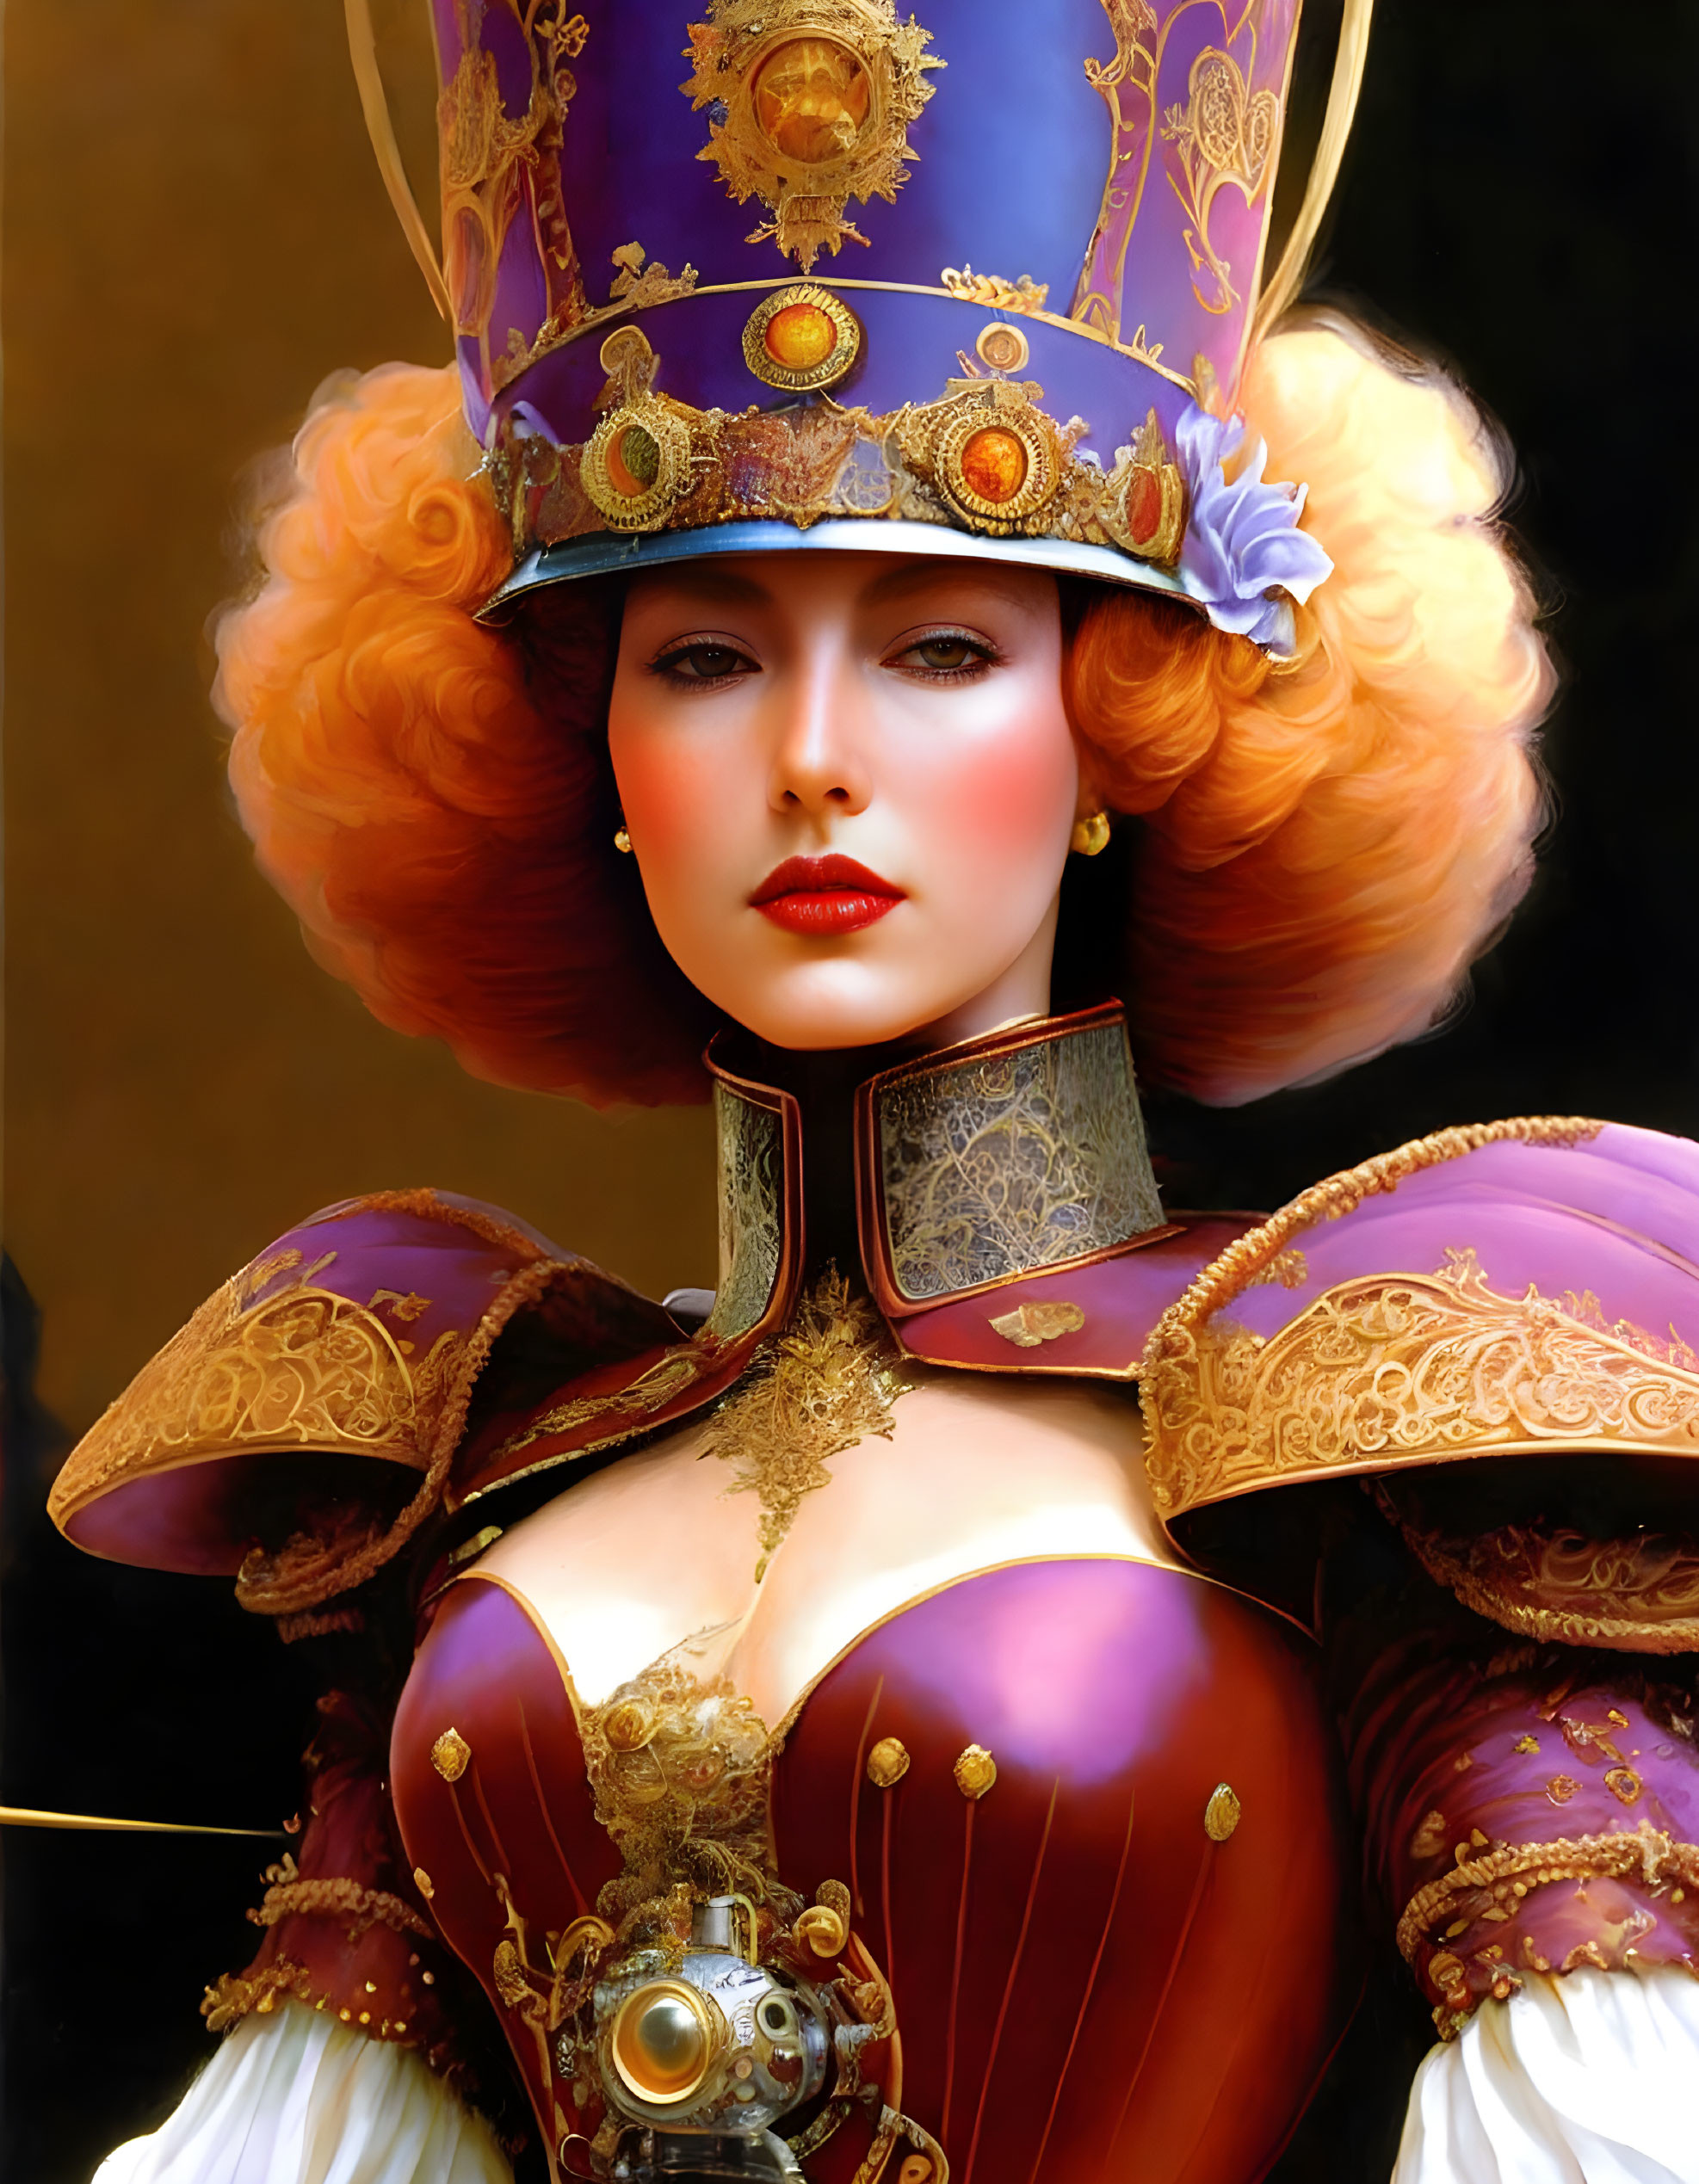 Detailed Illustration of Woman in Gold and Purple Military Attire